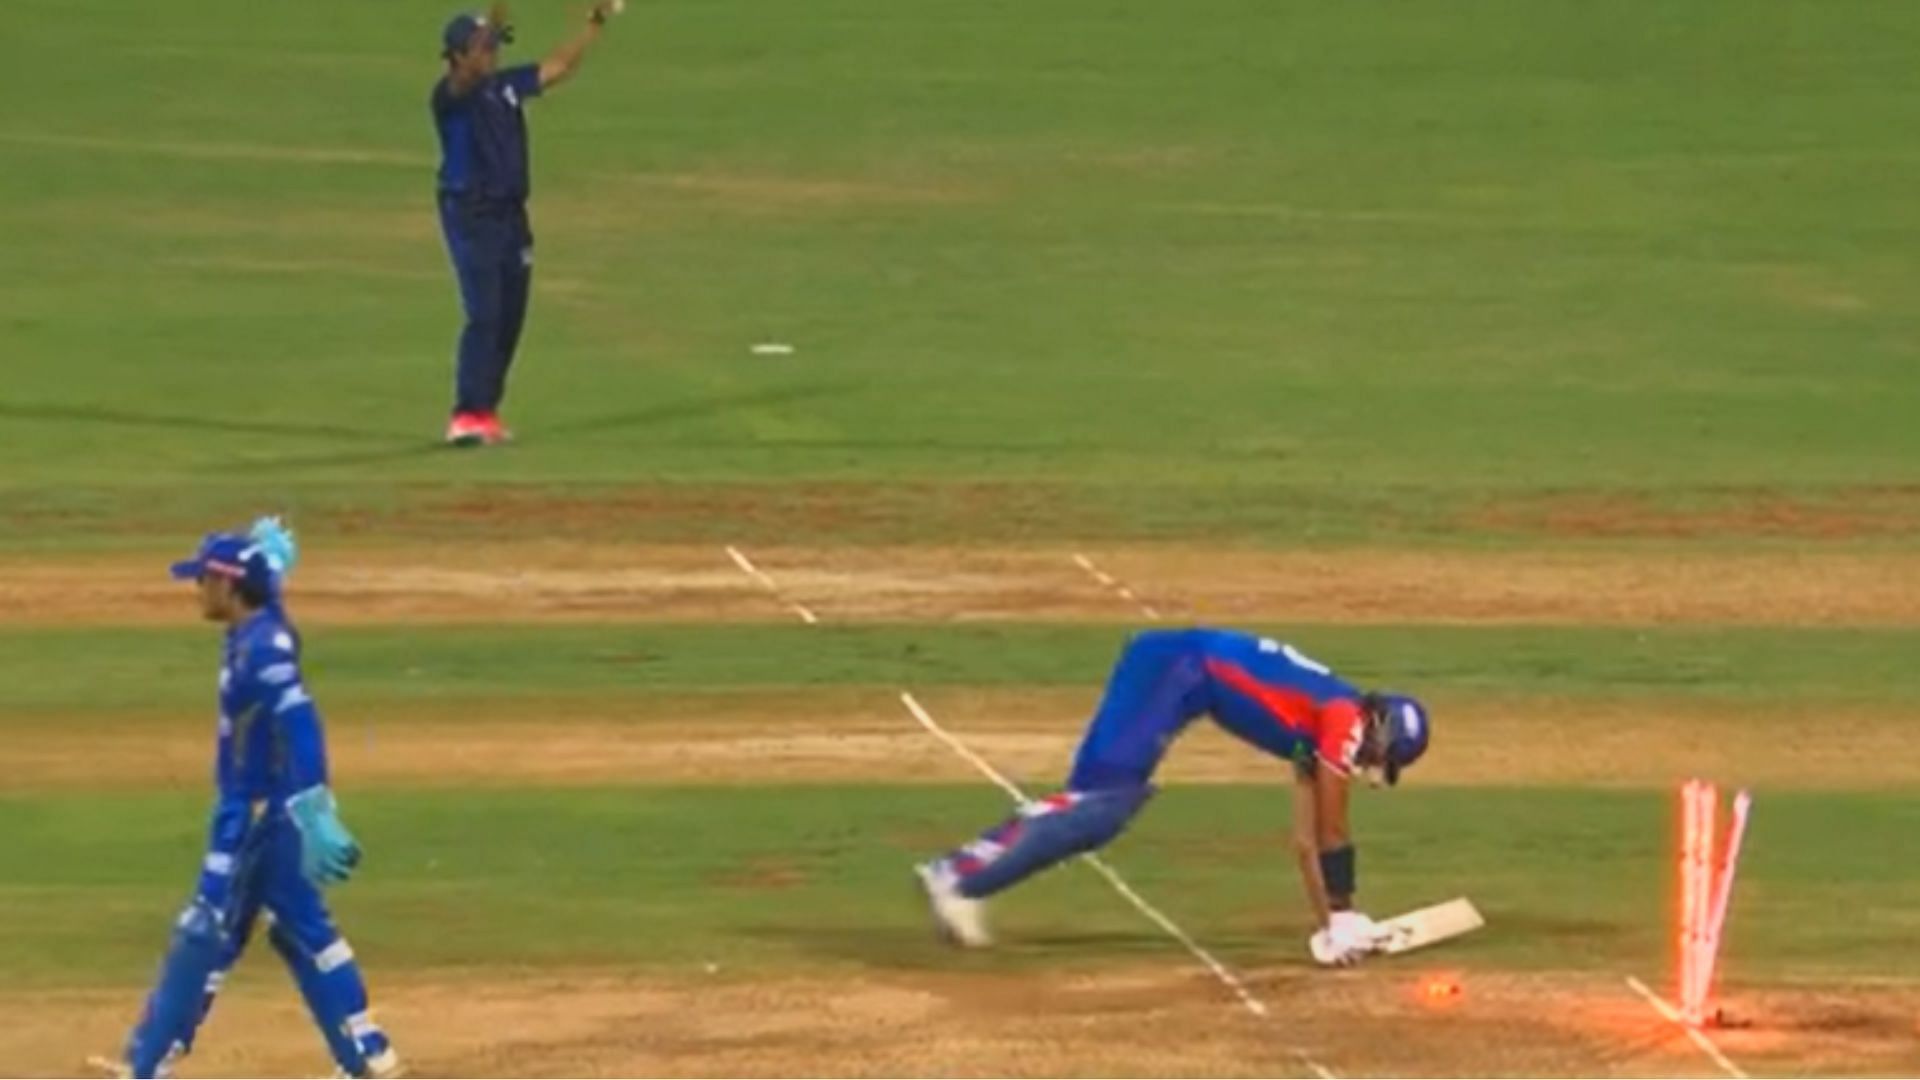 Axar Patel knew he was run out and started to walk even before the thr umpire